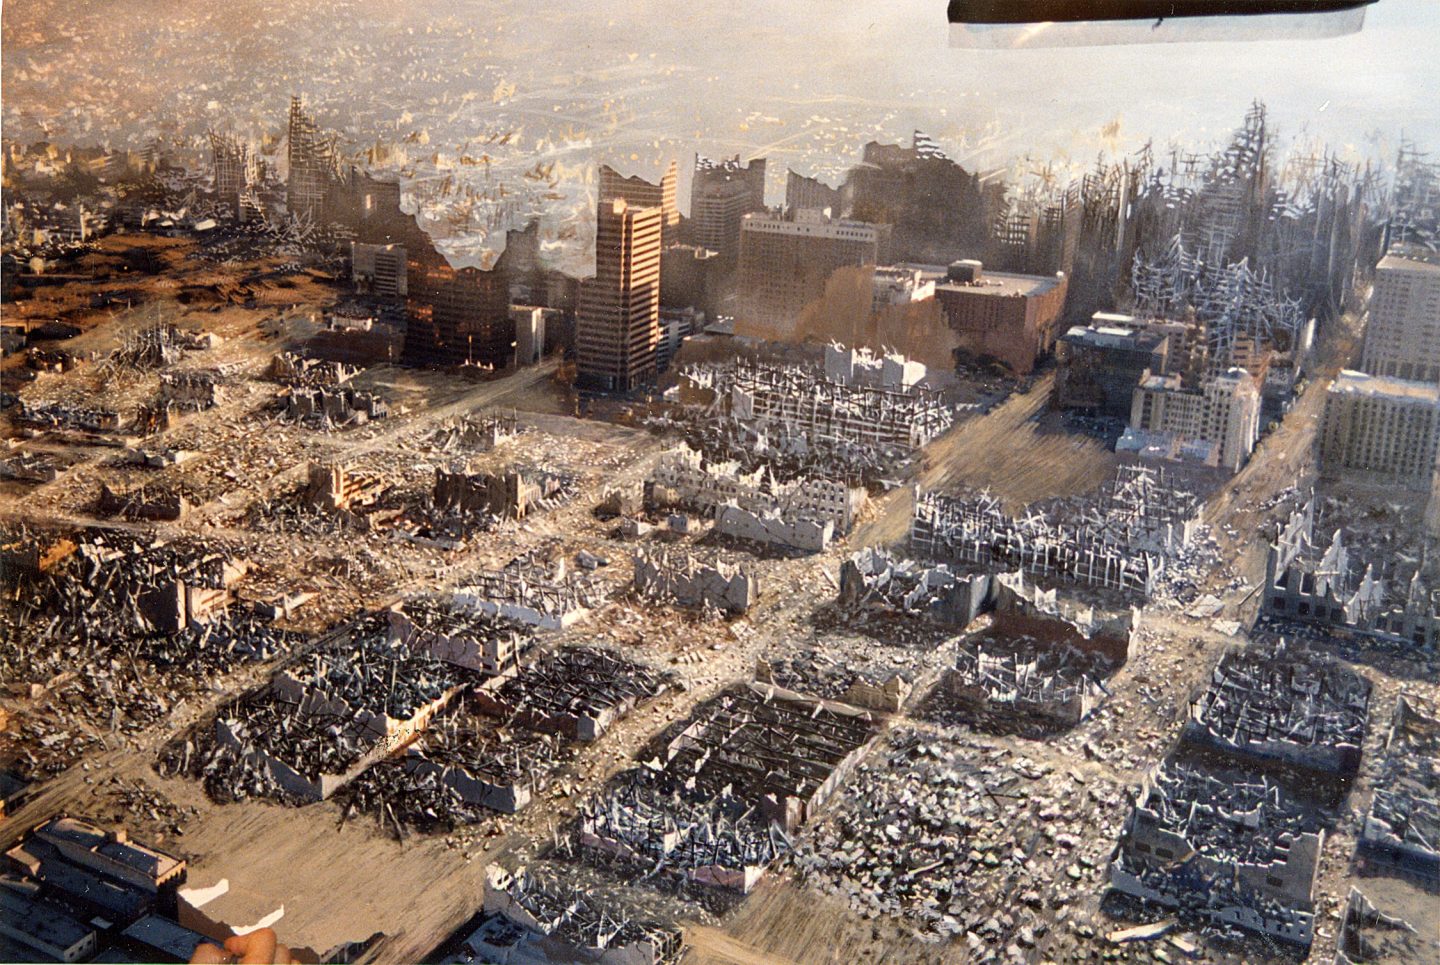 The matte painting of the destroyed LA scene by Rick Kilroy and Rick Riche. Robert Skotak himself made some minor touches to the painting with atmospheric overlays and highlights.